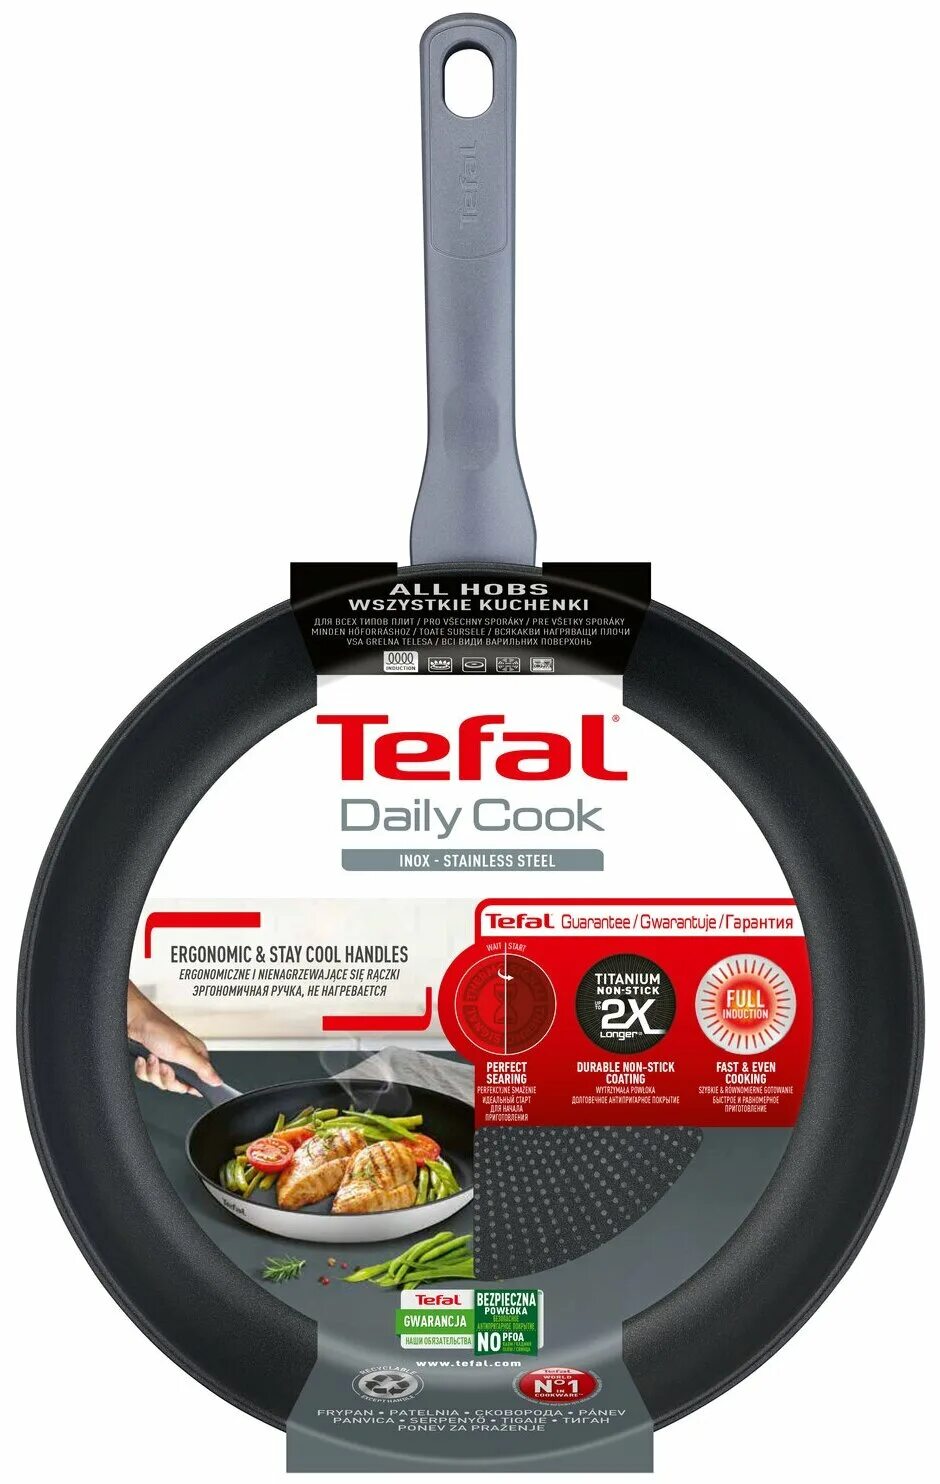 Tefal daily cook. Сковорода Tefal Daily Cook. Tefal Daily Cook g7300755. Tefal Daily Cook g7314055. Tefal Daily Cook g7300555.